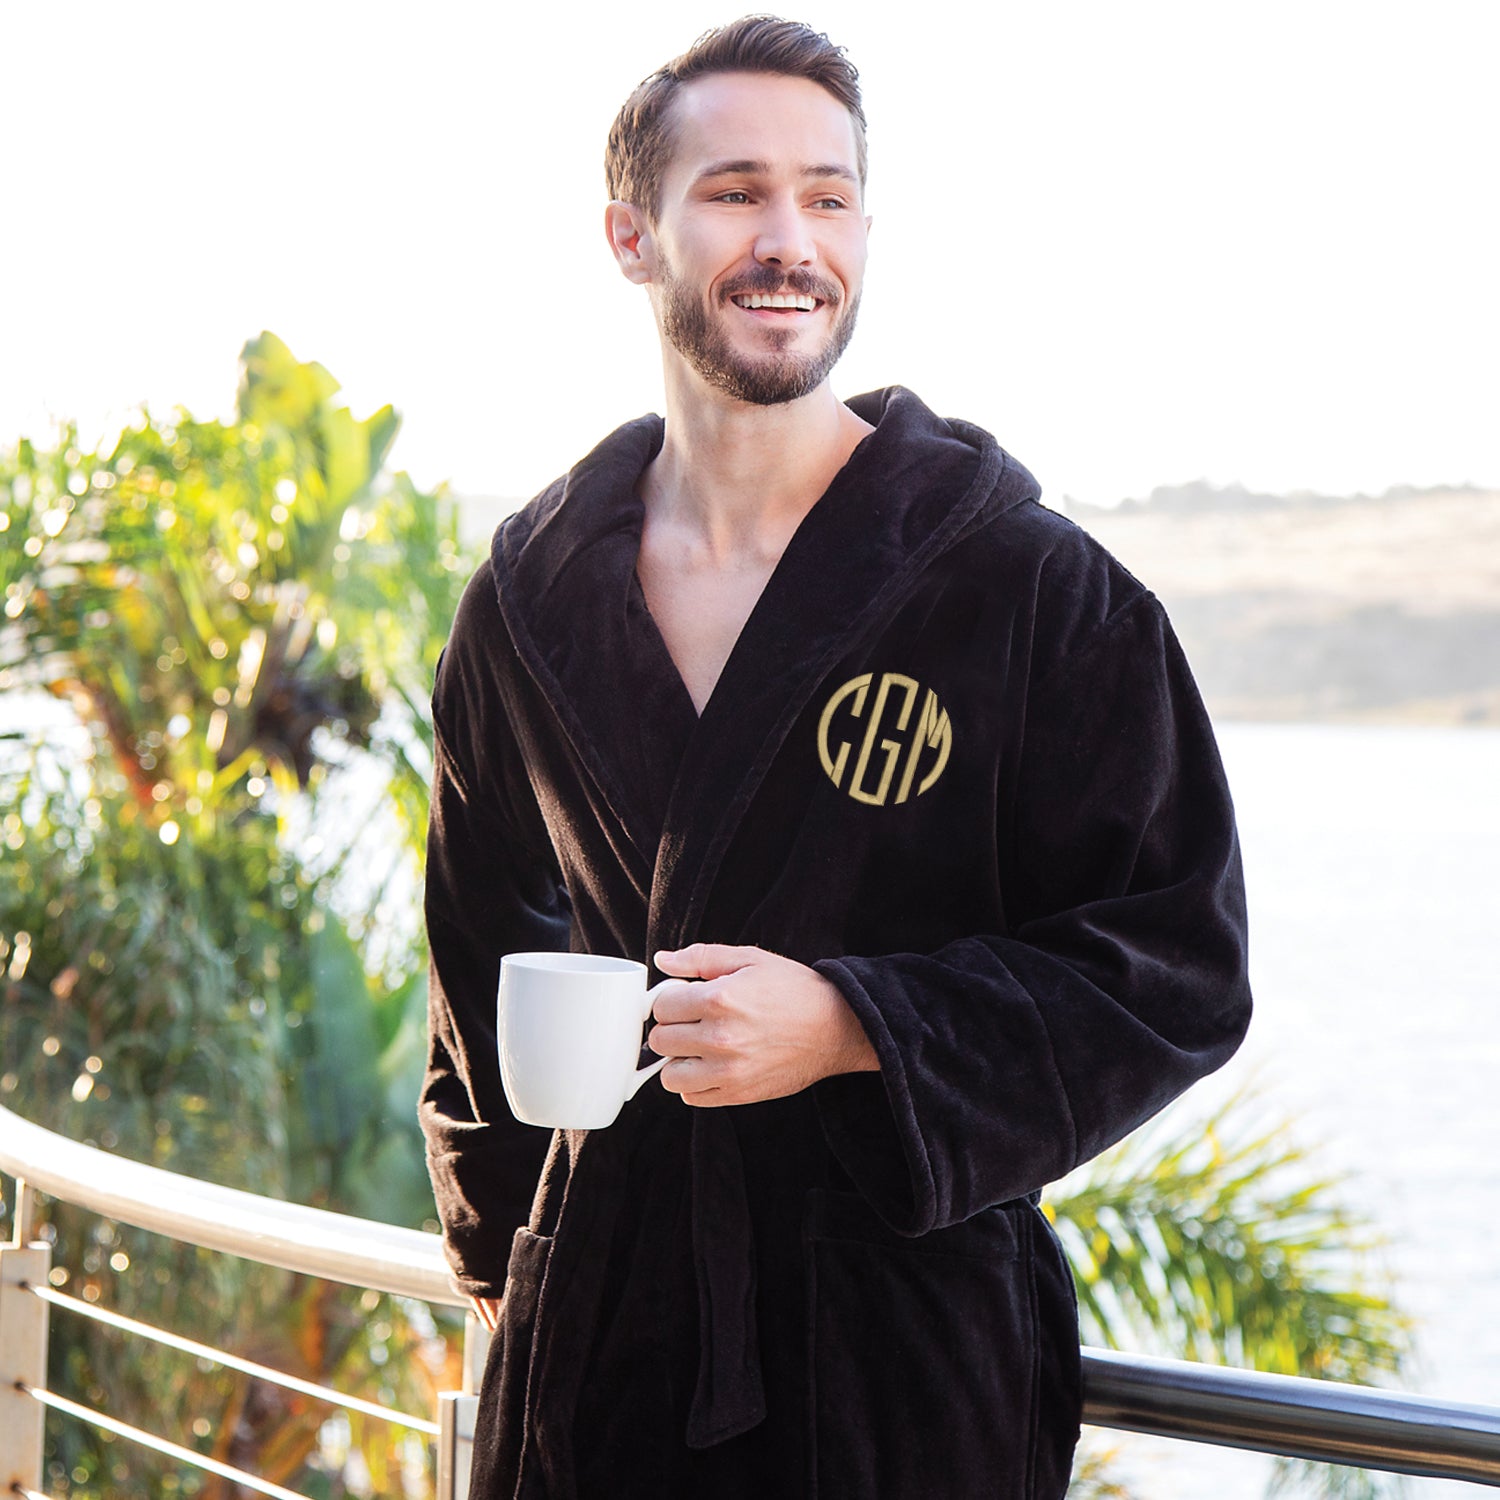 Ultimate Terry Velour Hooded Towels for Monogrammers